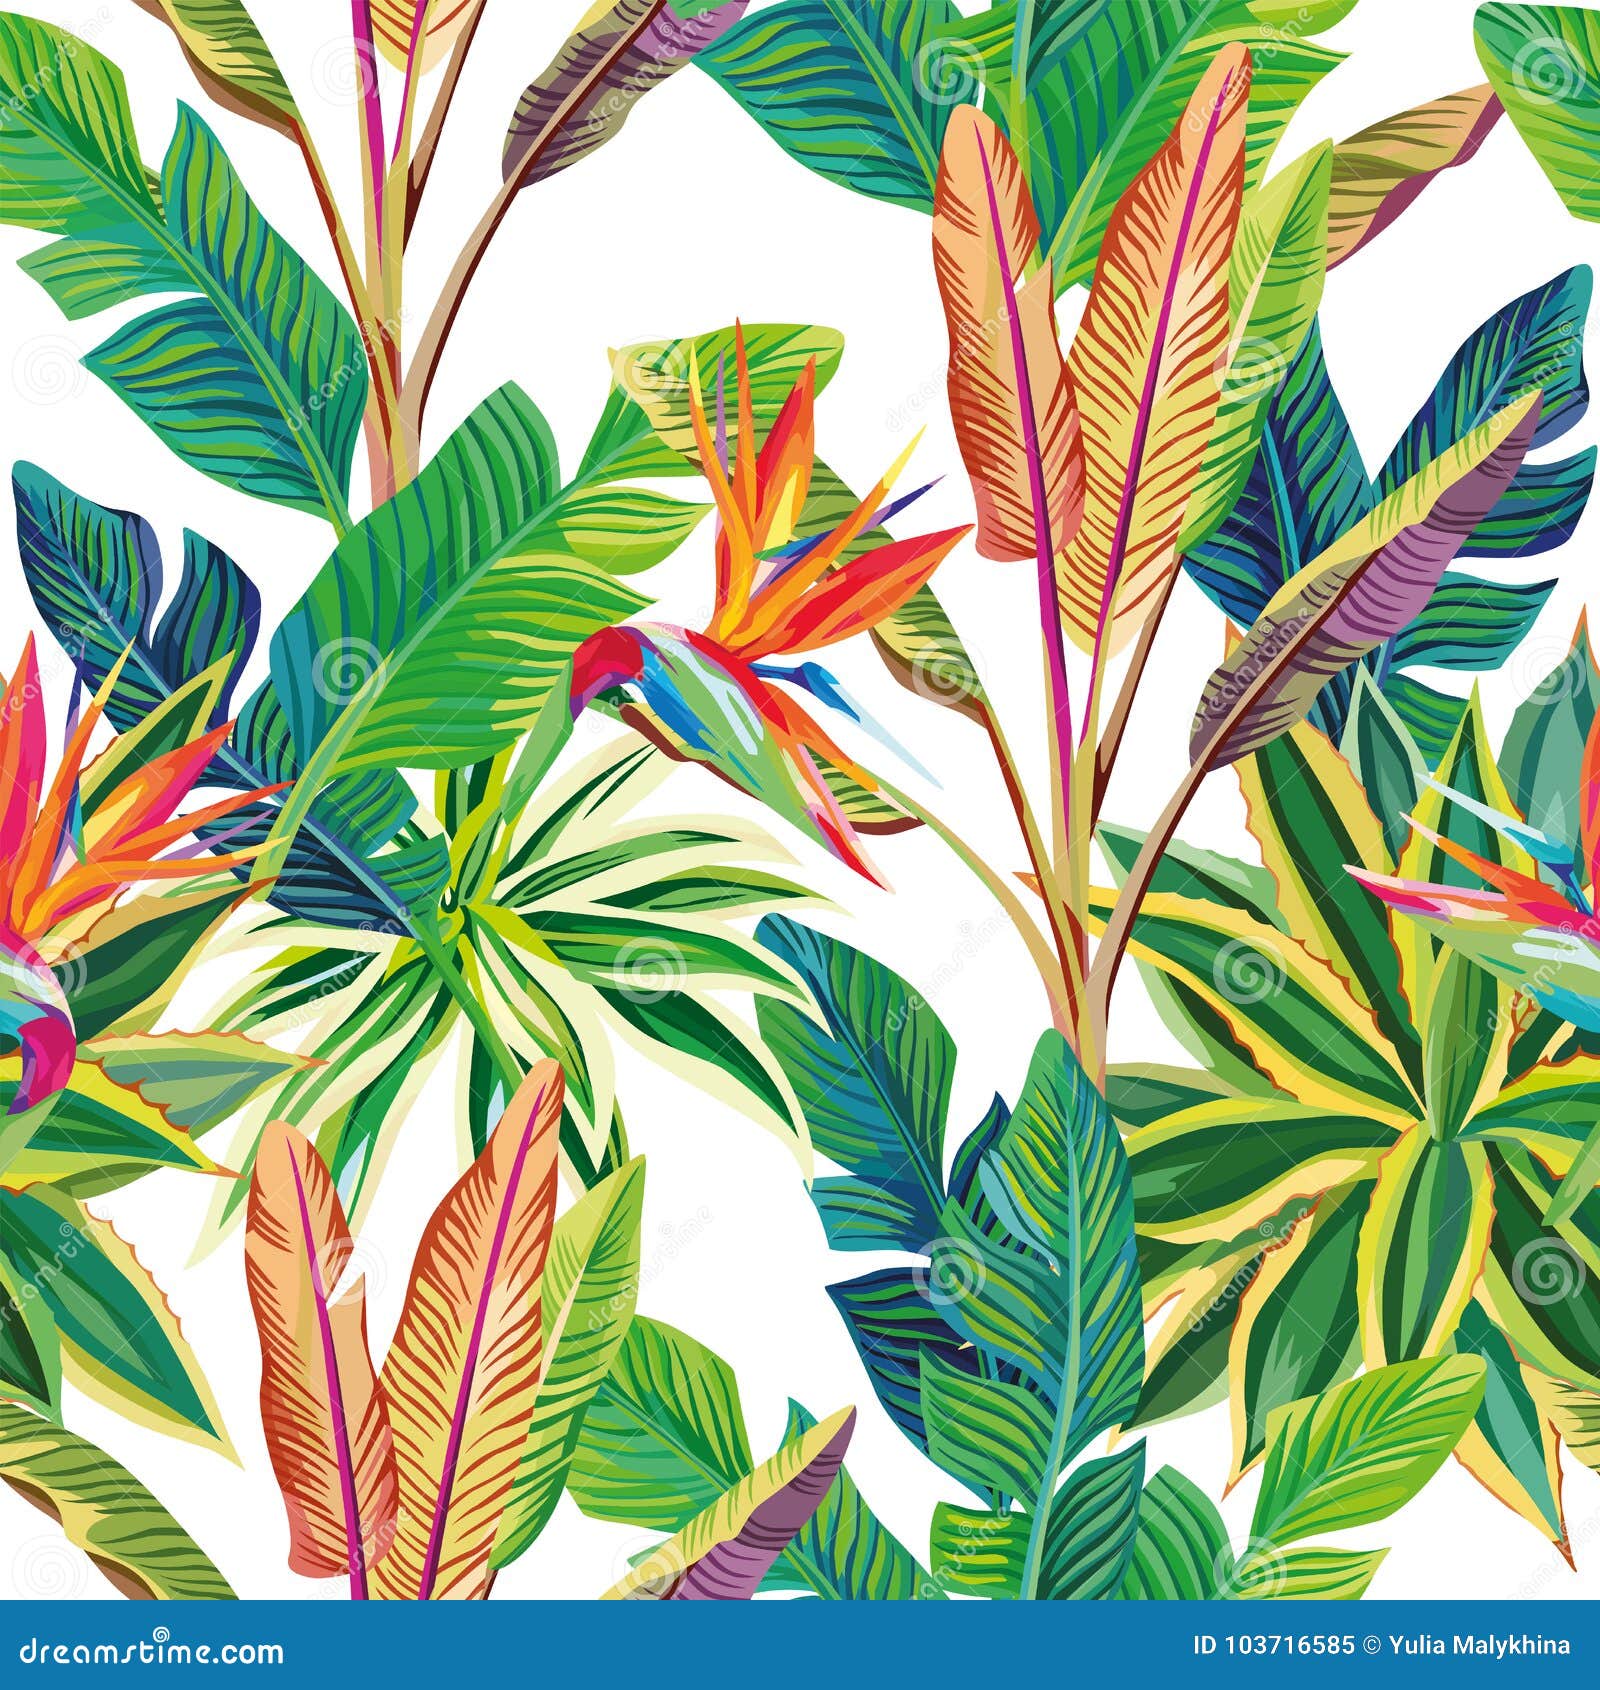 tropical jungle birds of paradise and leaves seamless